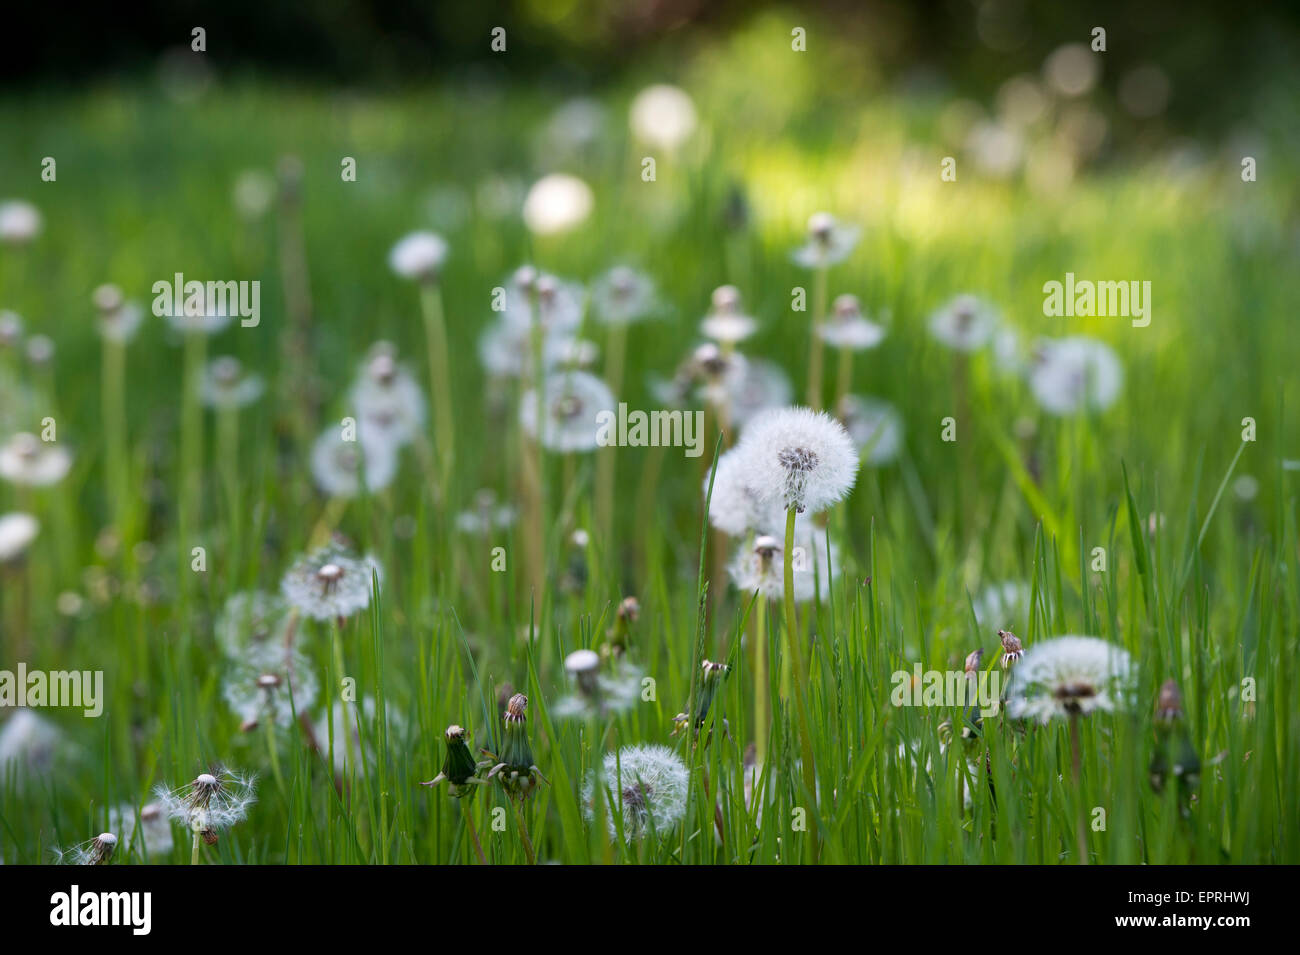 Dandelions gone to seed in grass in the english countryside. UK Stock Photo